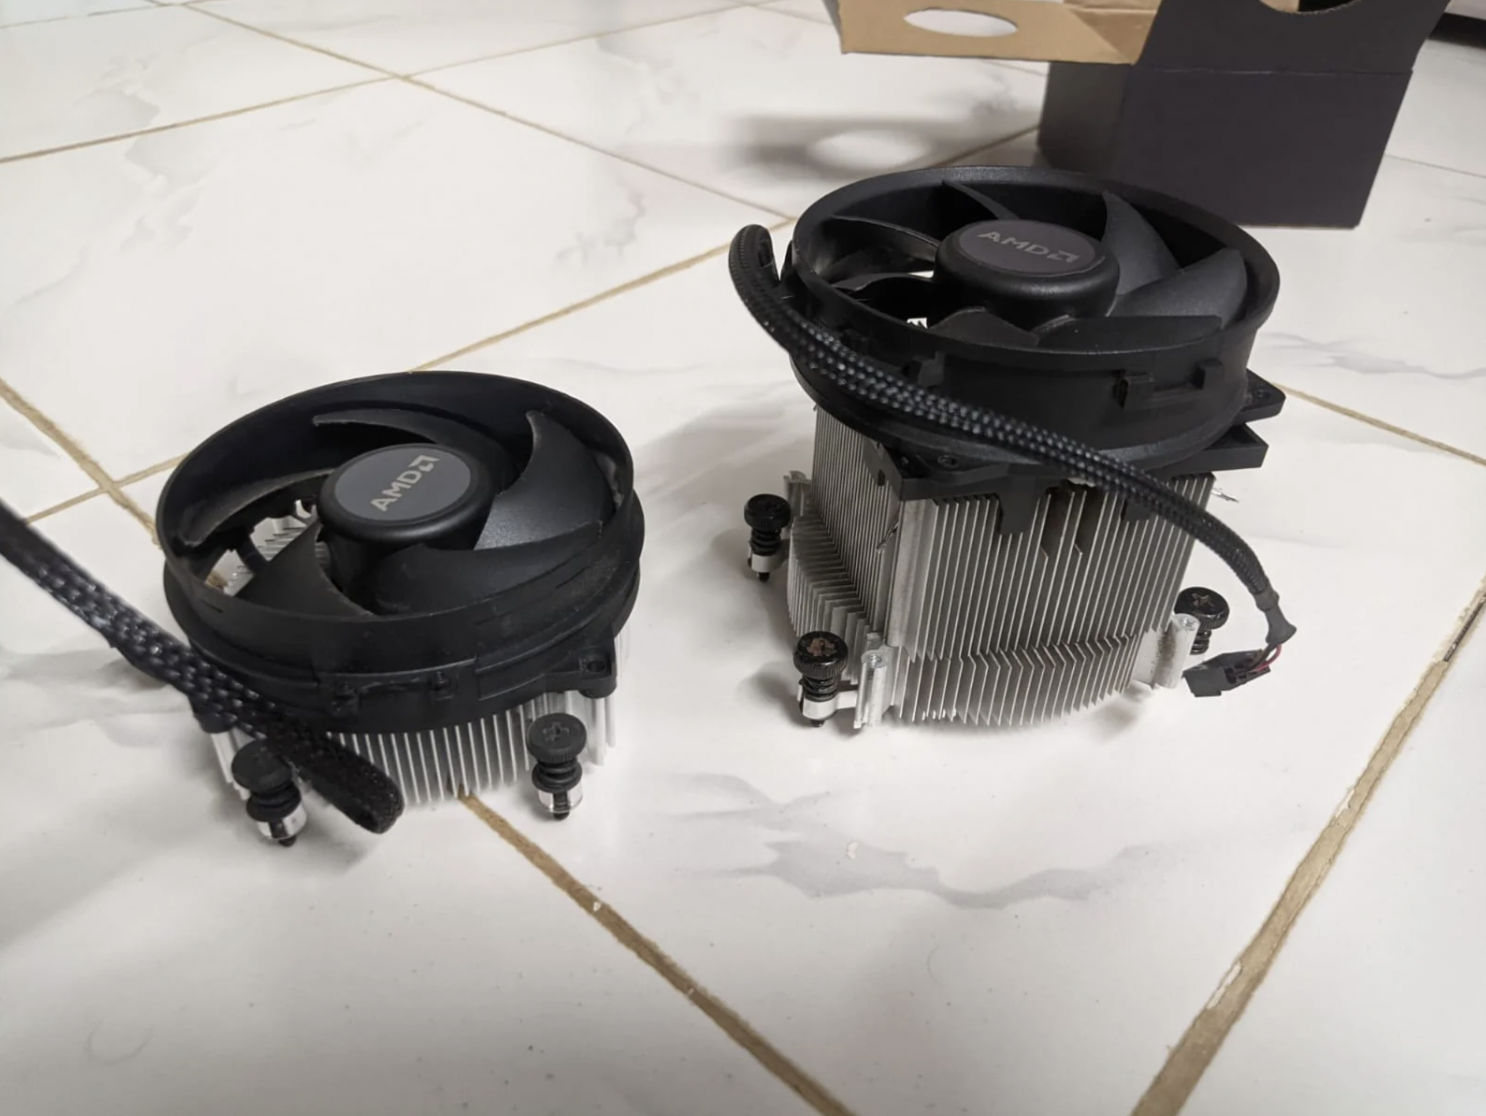 “CPU was overheating with the dinky stock cooler so I stuck 2 heatsinks together. Dropped 10 degrees under load.”